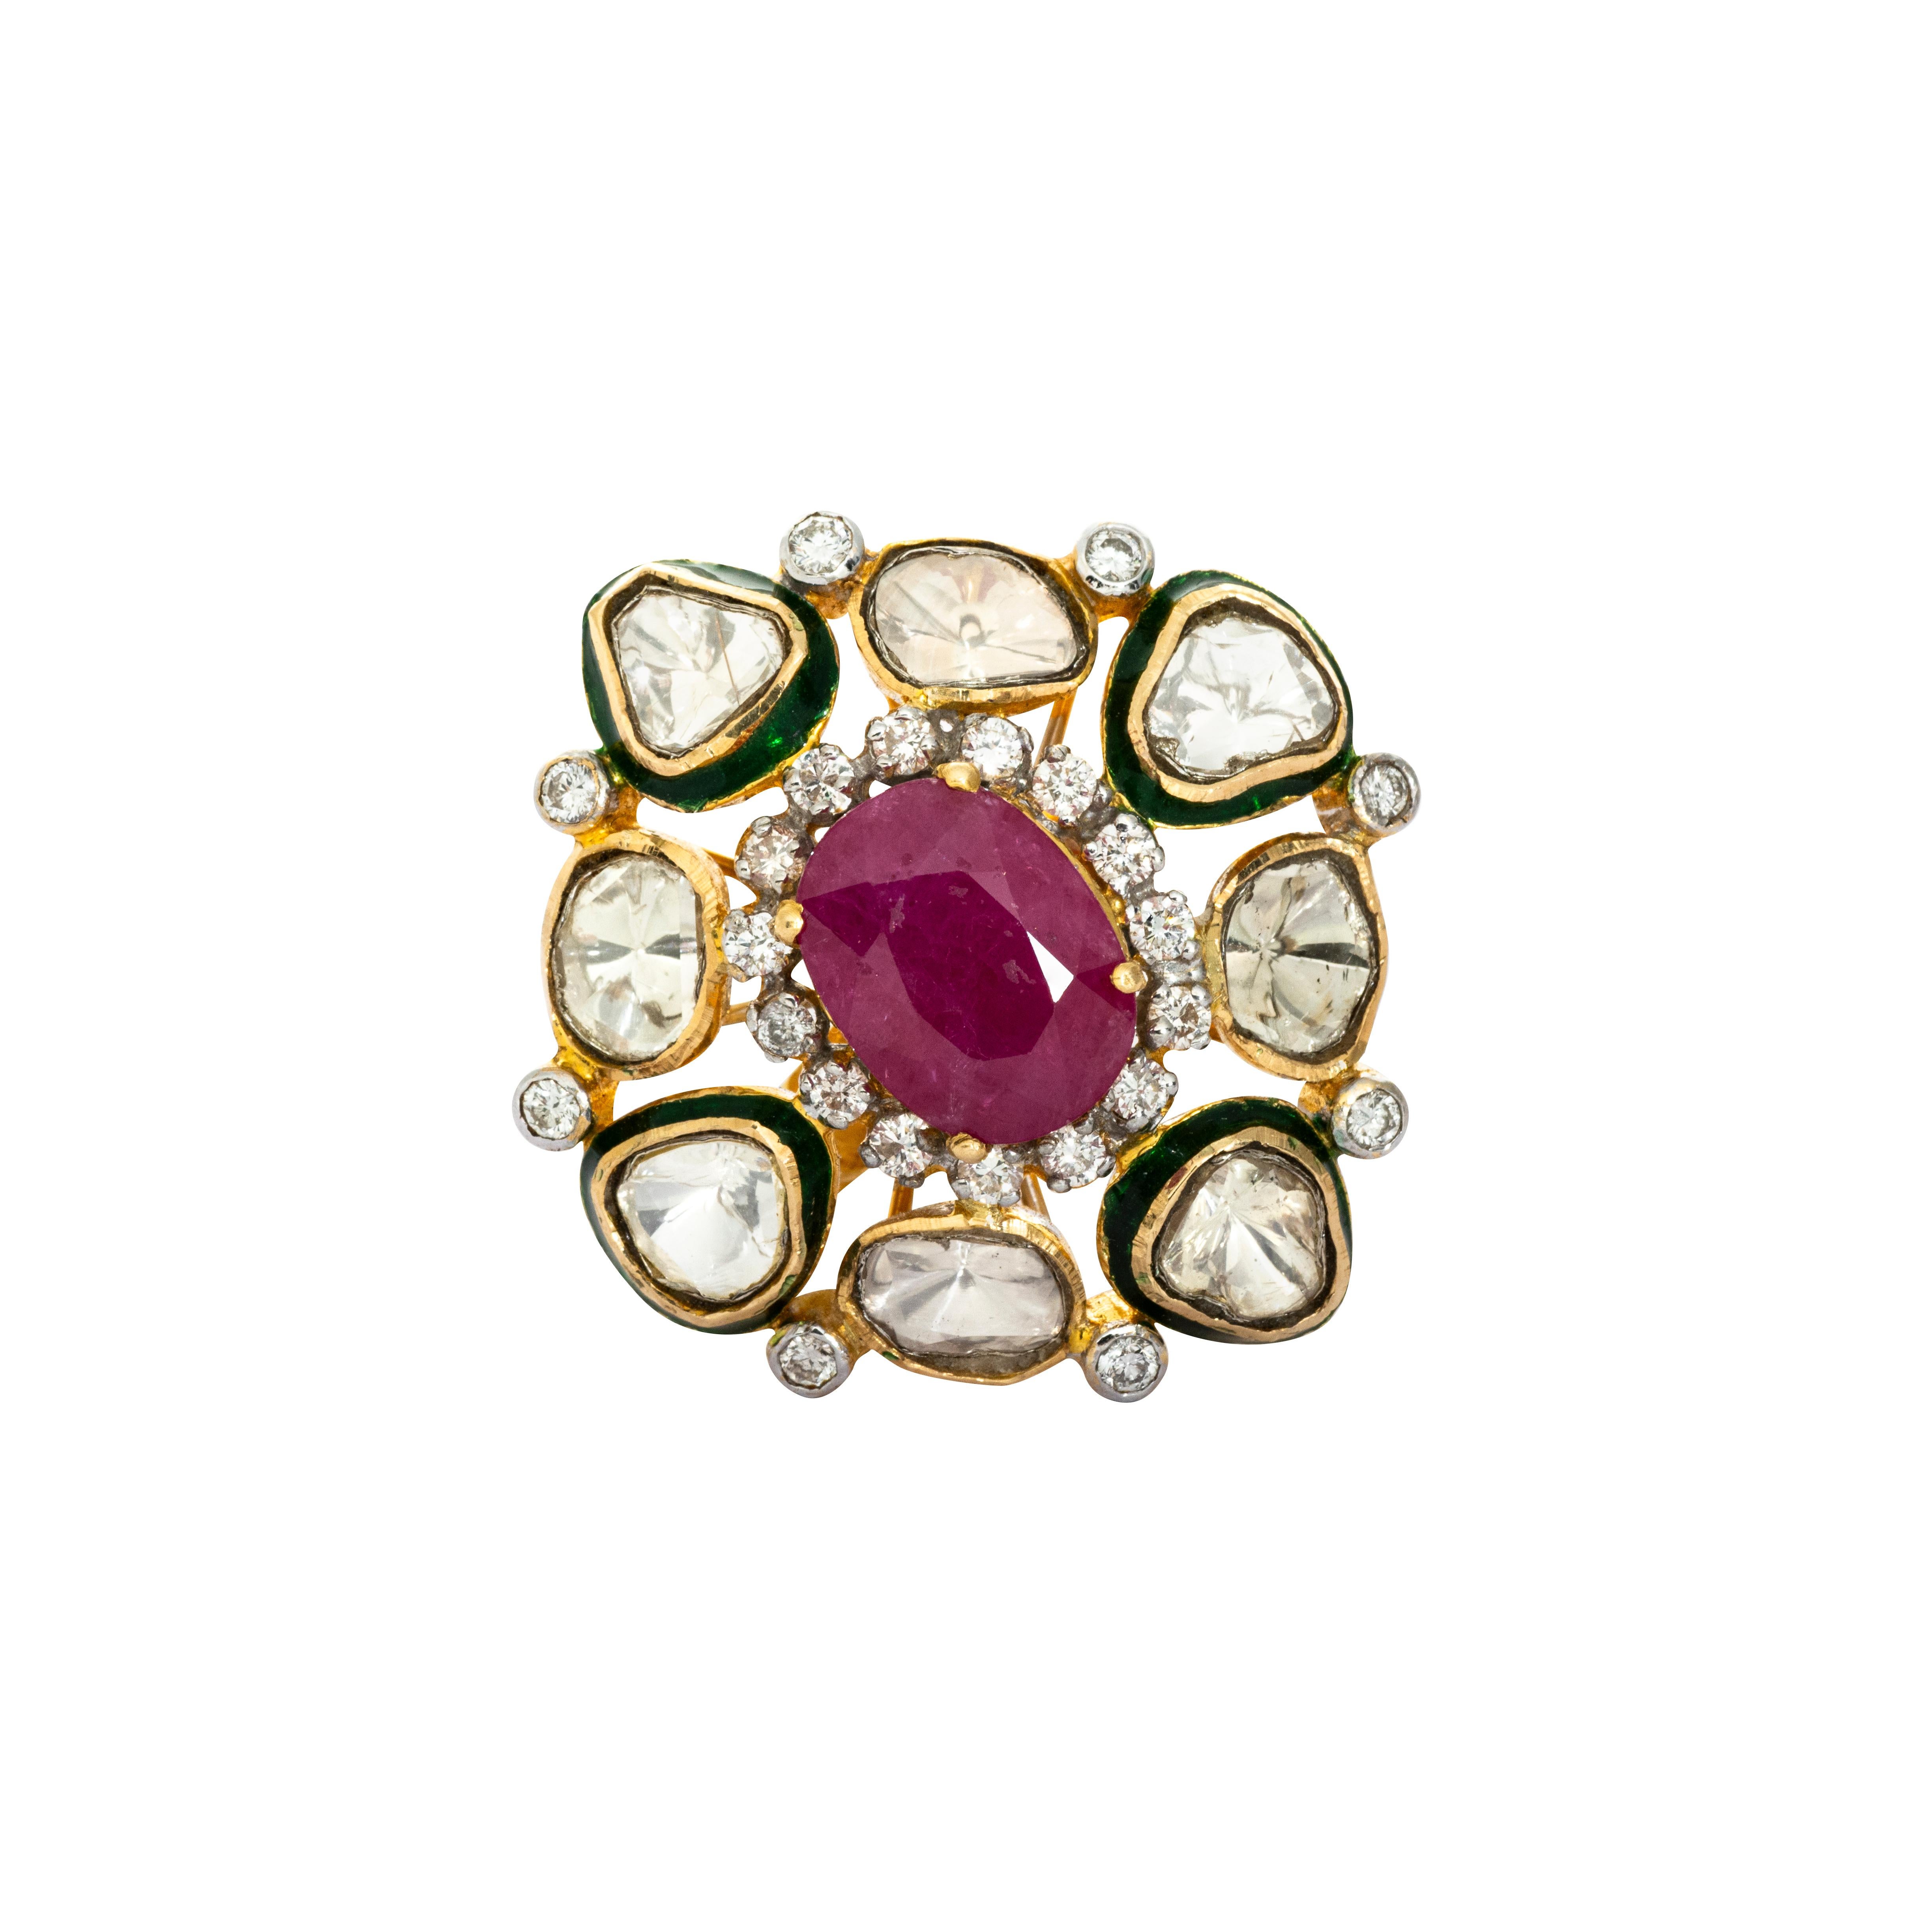 18 Karat Yellow Gold Ruby Diamond And Enamel Cocktail Ring

Indian tradition fuses with contemporary design in the beautiful cocktail ring. Set in 18 Karat yellow gold it is studded with brilliant cut round diamonds, uncut (polki cut) diamonds and